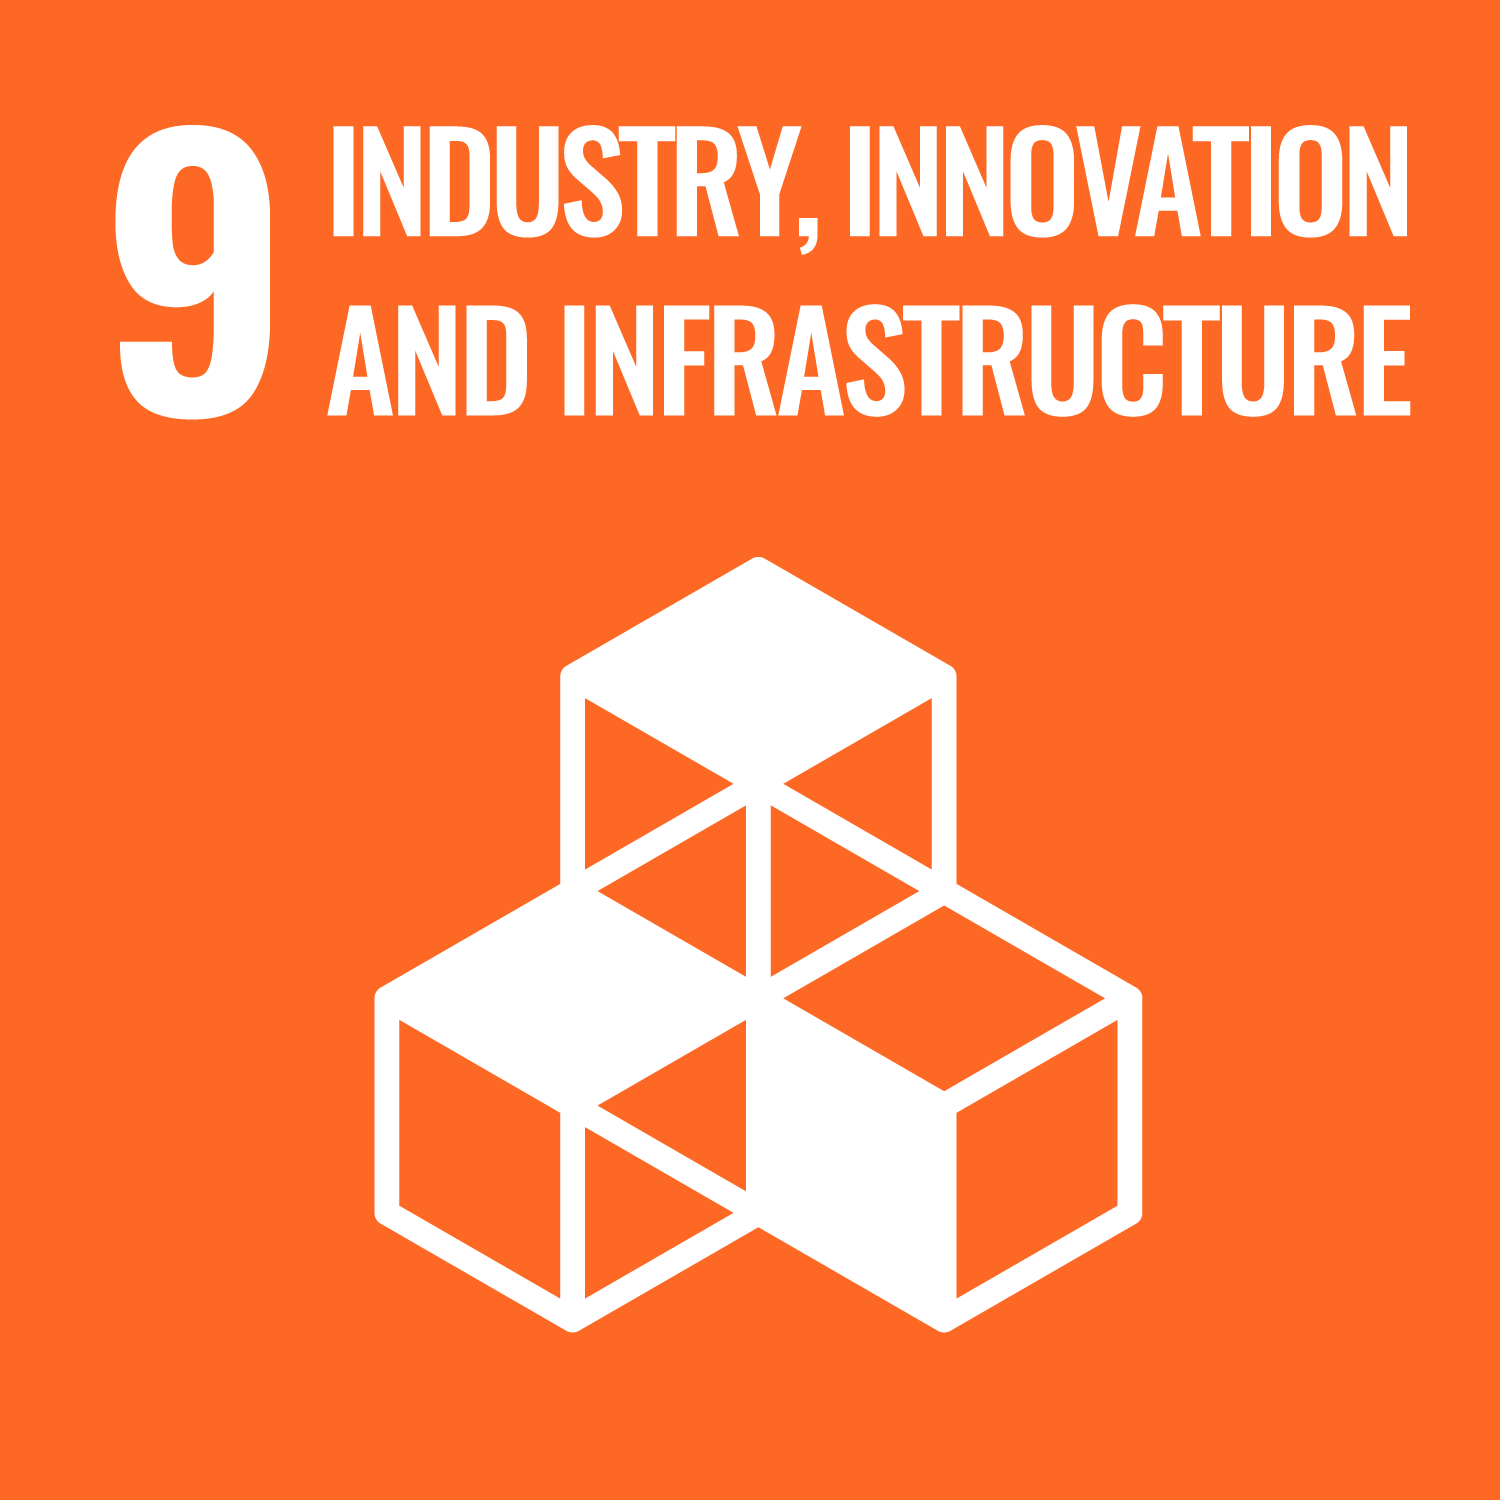 Graphic for SDG9 Innovation, Industry and Infrastructure